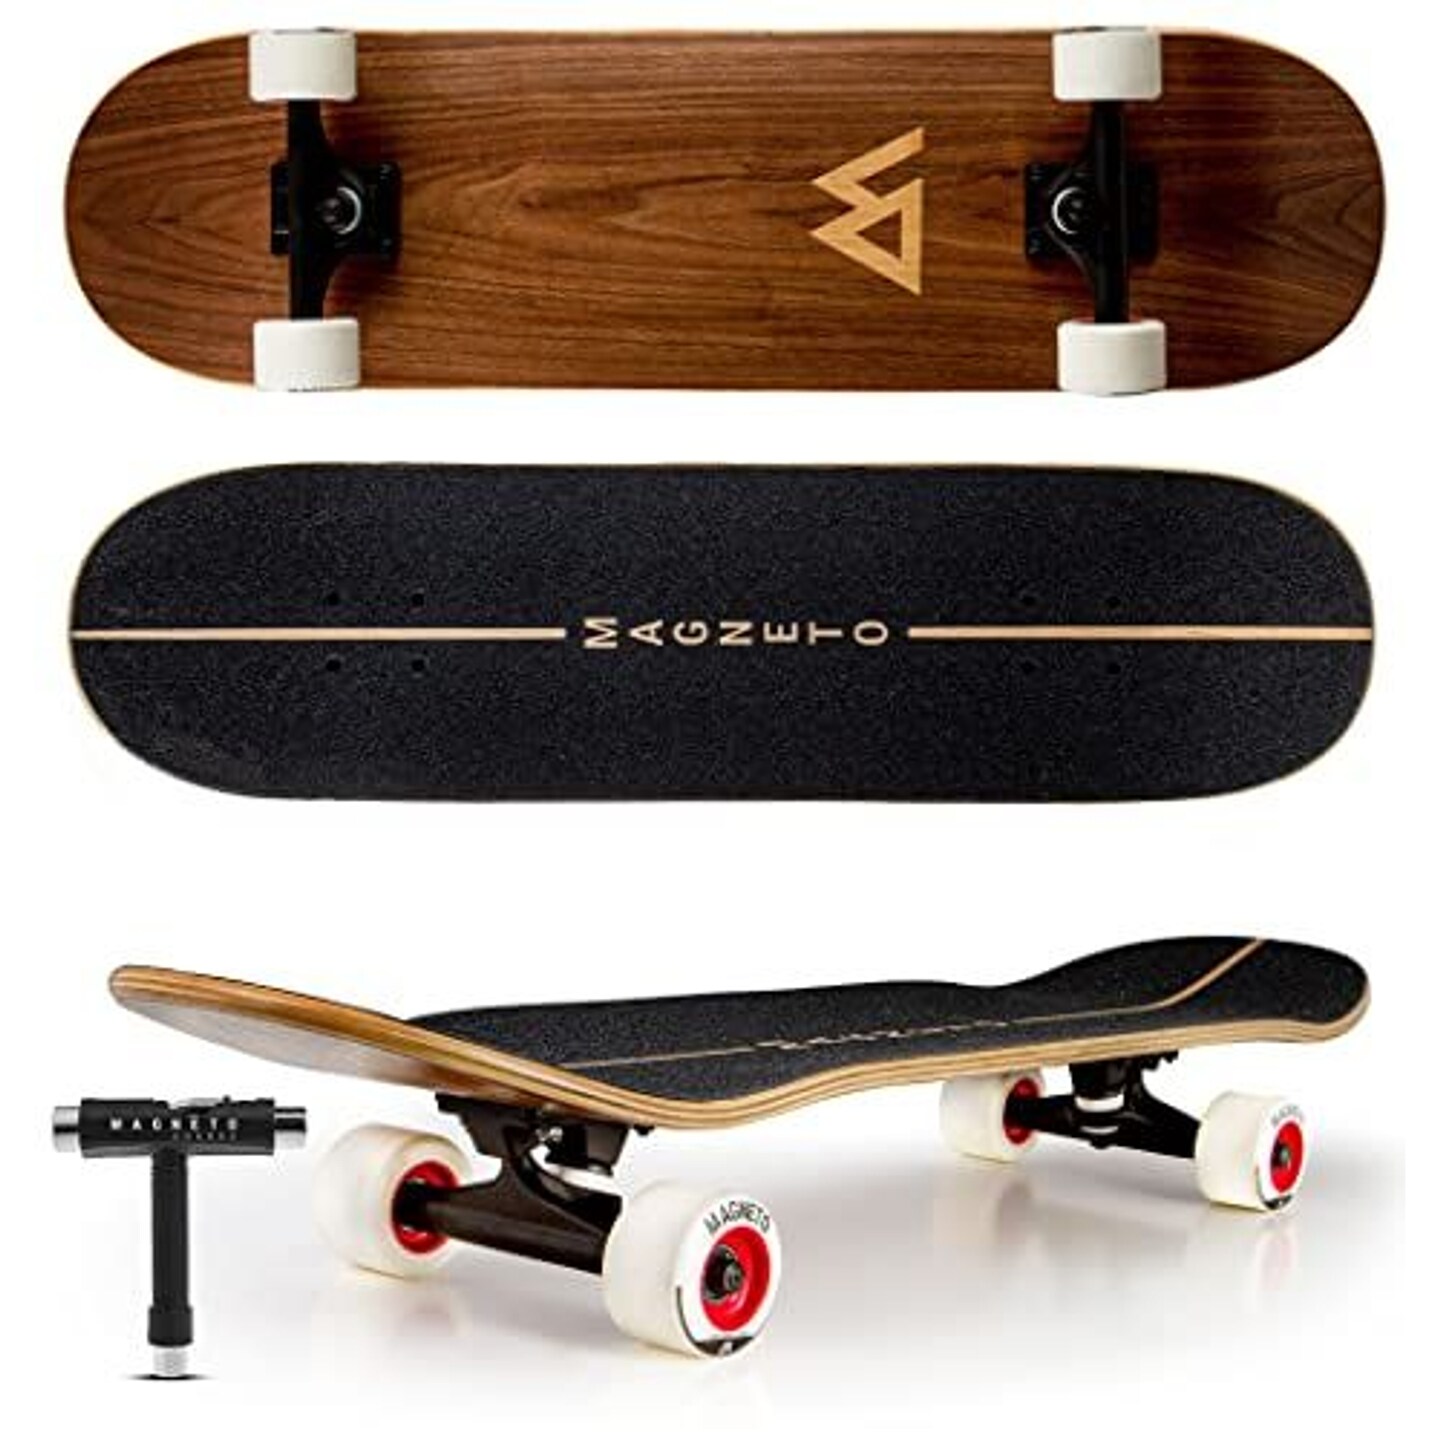 Magneto SUV Skateboards | Fully Assembled Complete 31&#x22; x 8.5&#x22; Standard Size | 7 Layer Canadian Maple Deck | Designed for All Types of Riding Adults Teens Boys Girls | Free Skate Tool - Natural